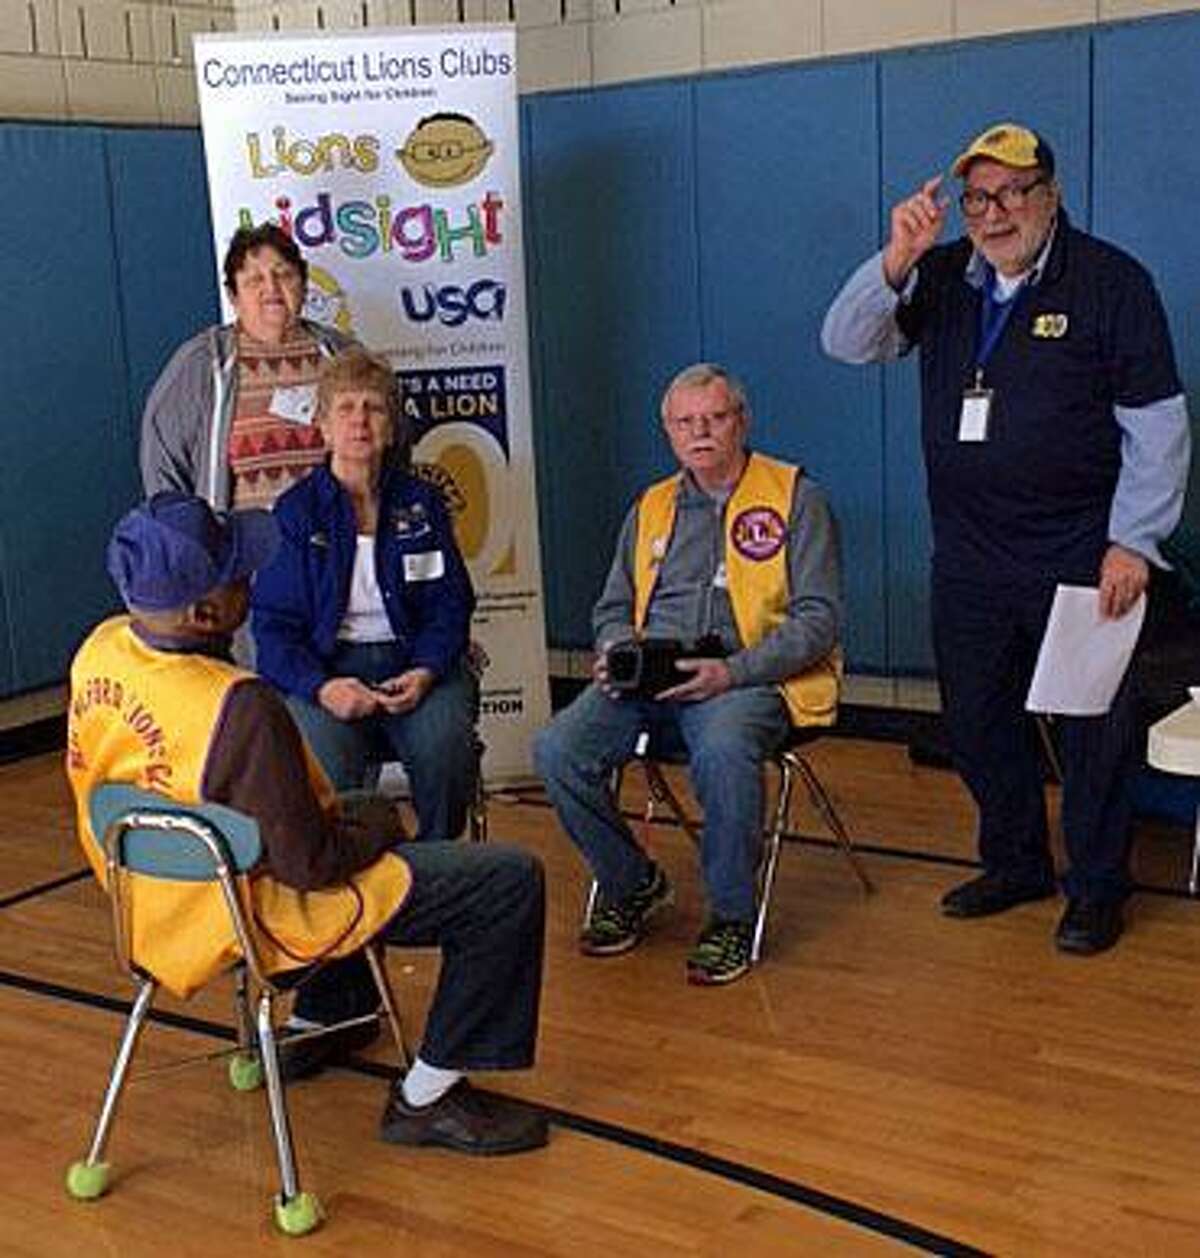 The New Milford Lions Club recently provided no-cost computerized screening of vision for 500 children through second grade in the New Milford school system. Above are, from left to right, Lions Herman Izzard and Josephine Barrett, Lion Phyllis Sandshaw of the Torrington Lions Club and Lions John Dunne and Bob Coppola.